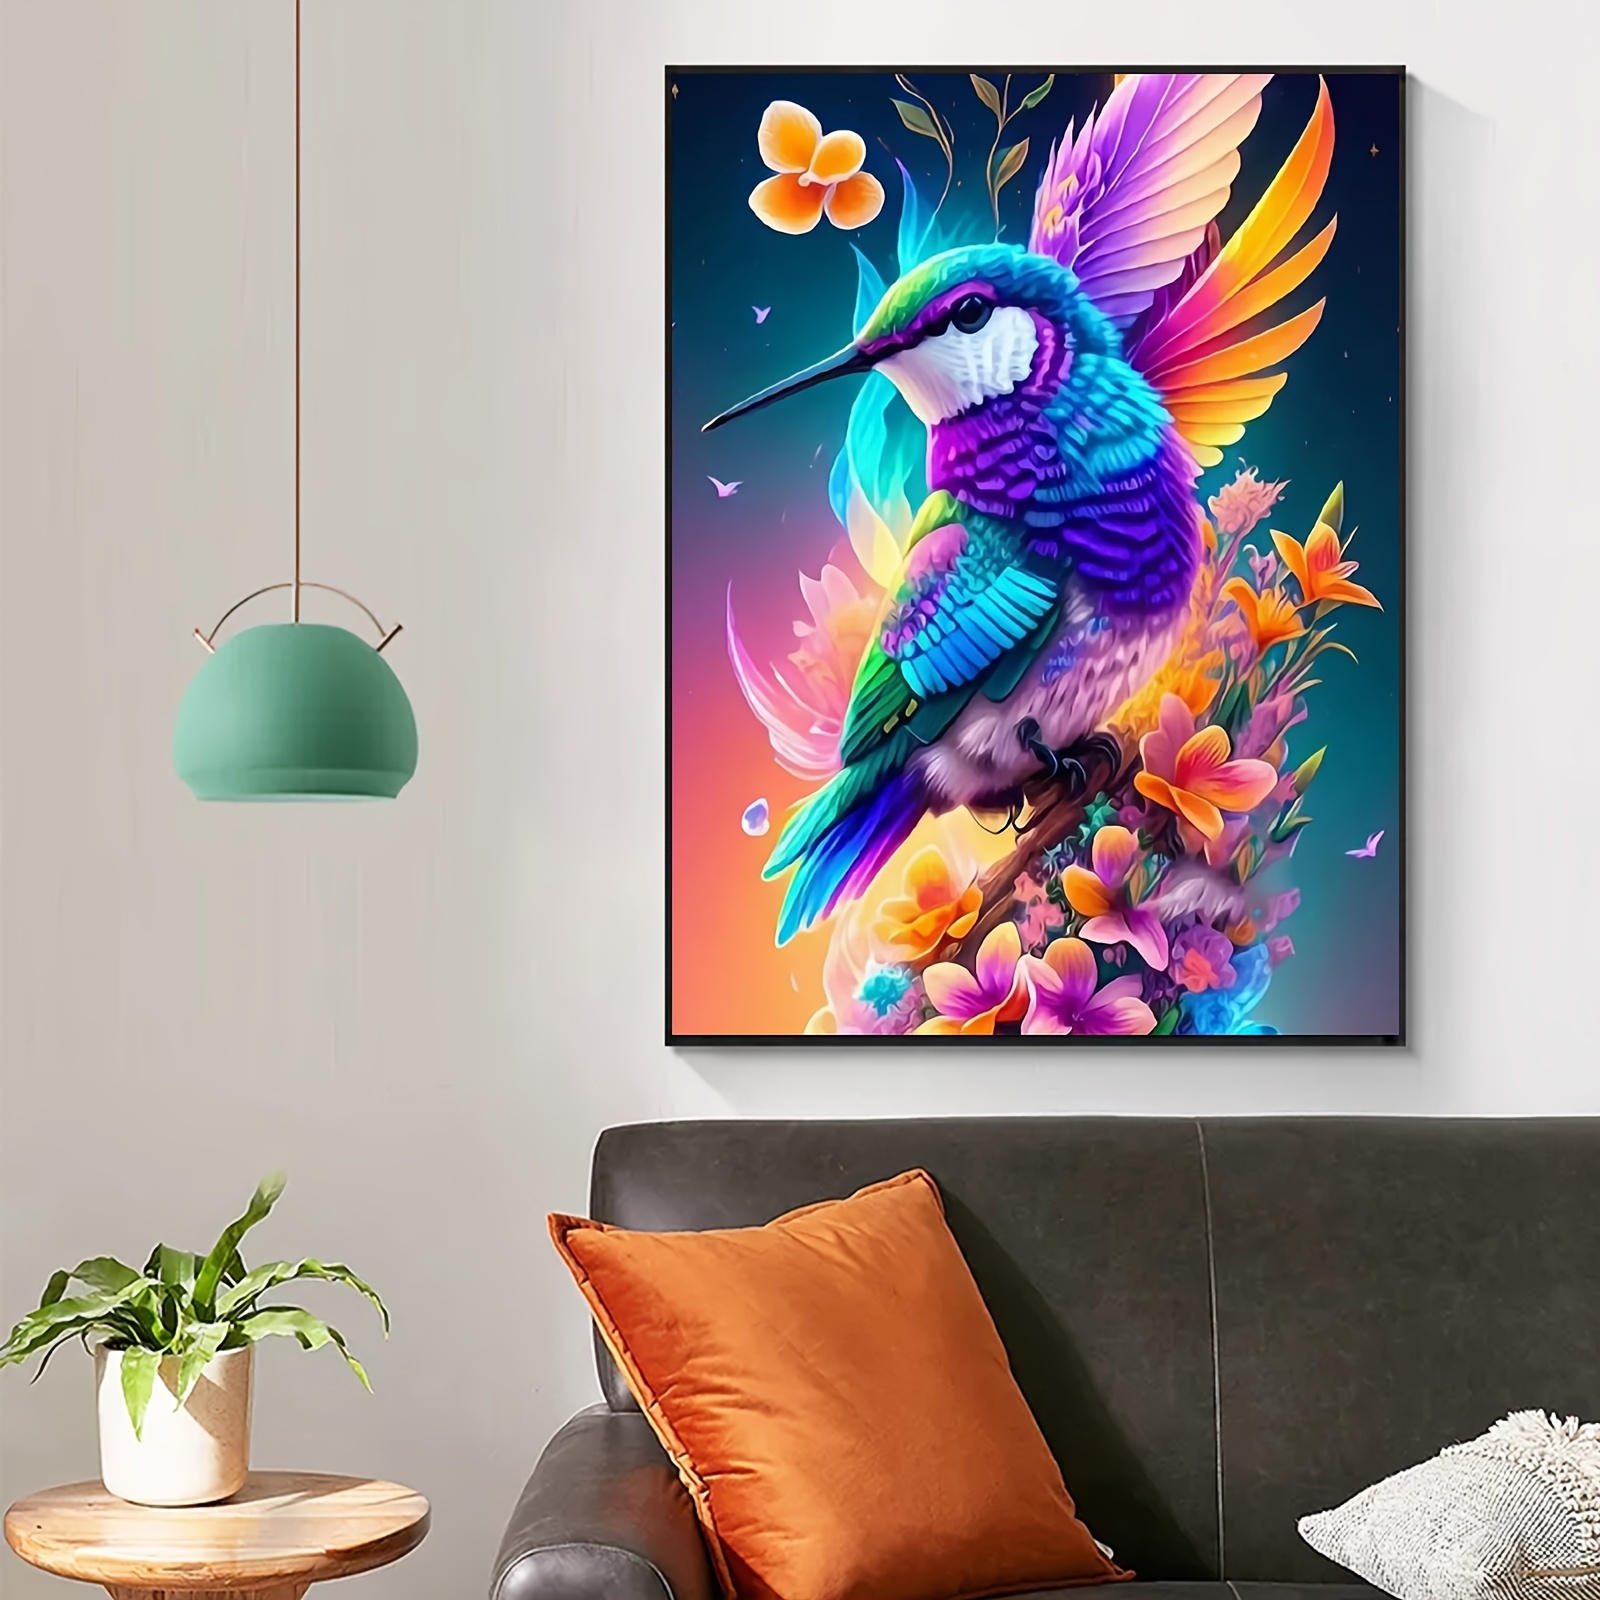 Hummingbird Diamond Painting Kits for Adults Beginners, 5D DIY Diamond Art  Birds Full Drills Painting by Diamond Dots Picture Handmade Crafts for Wall